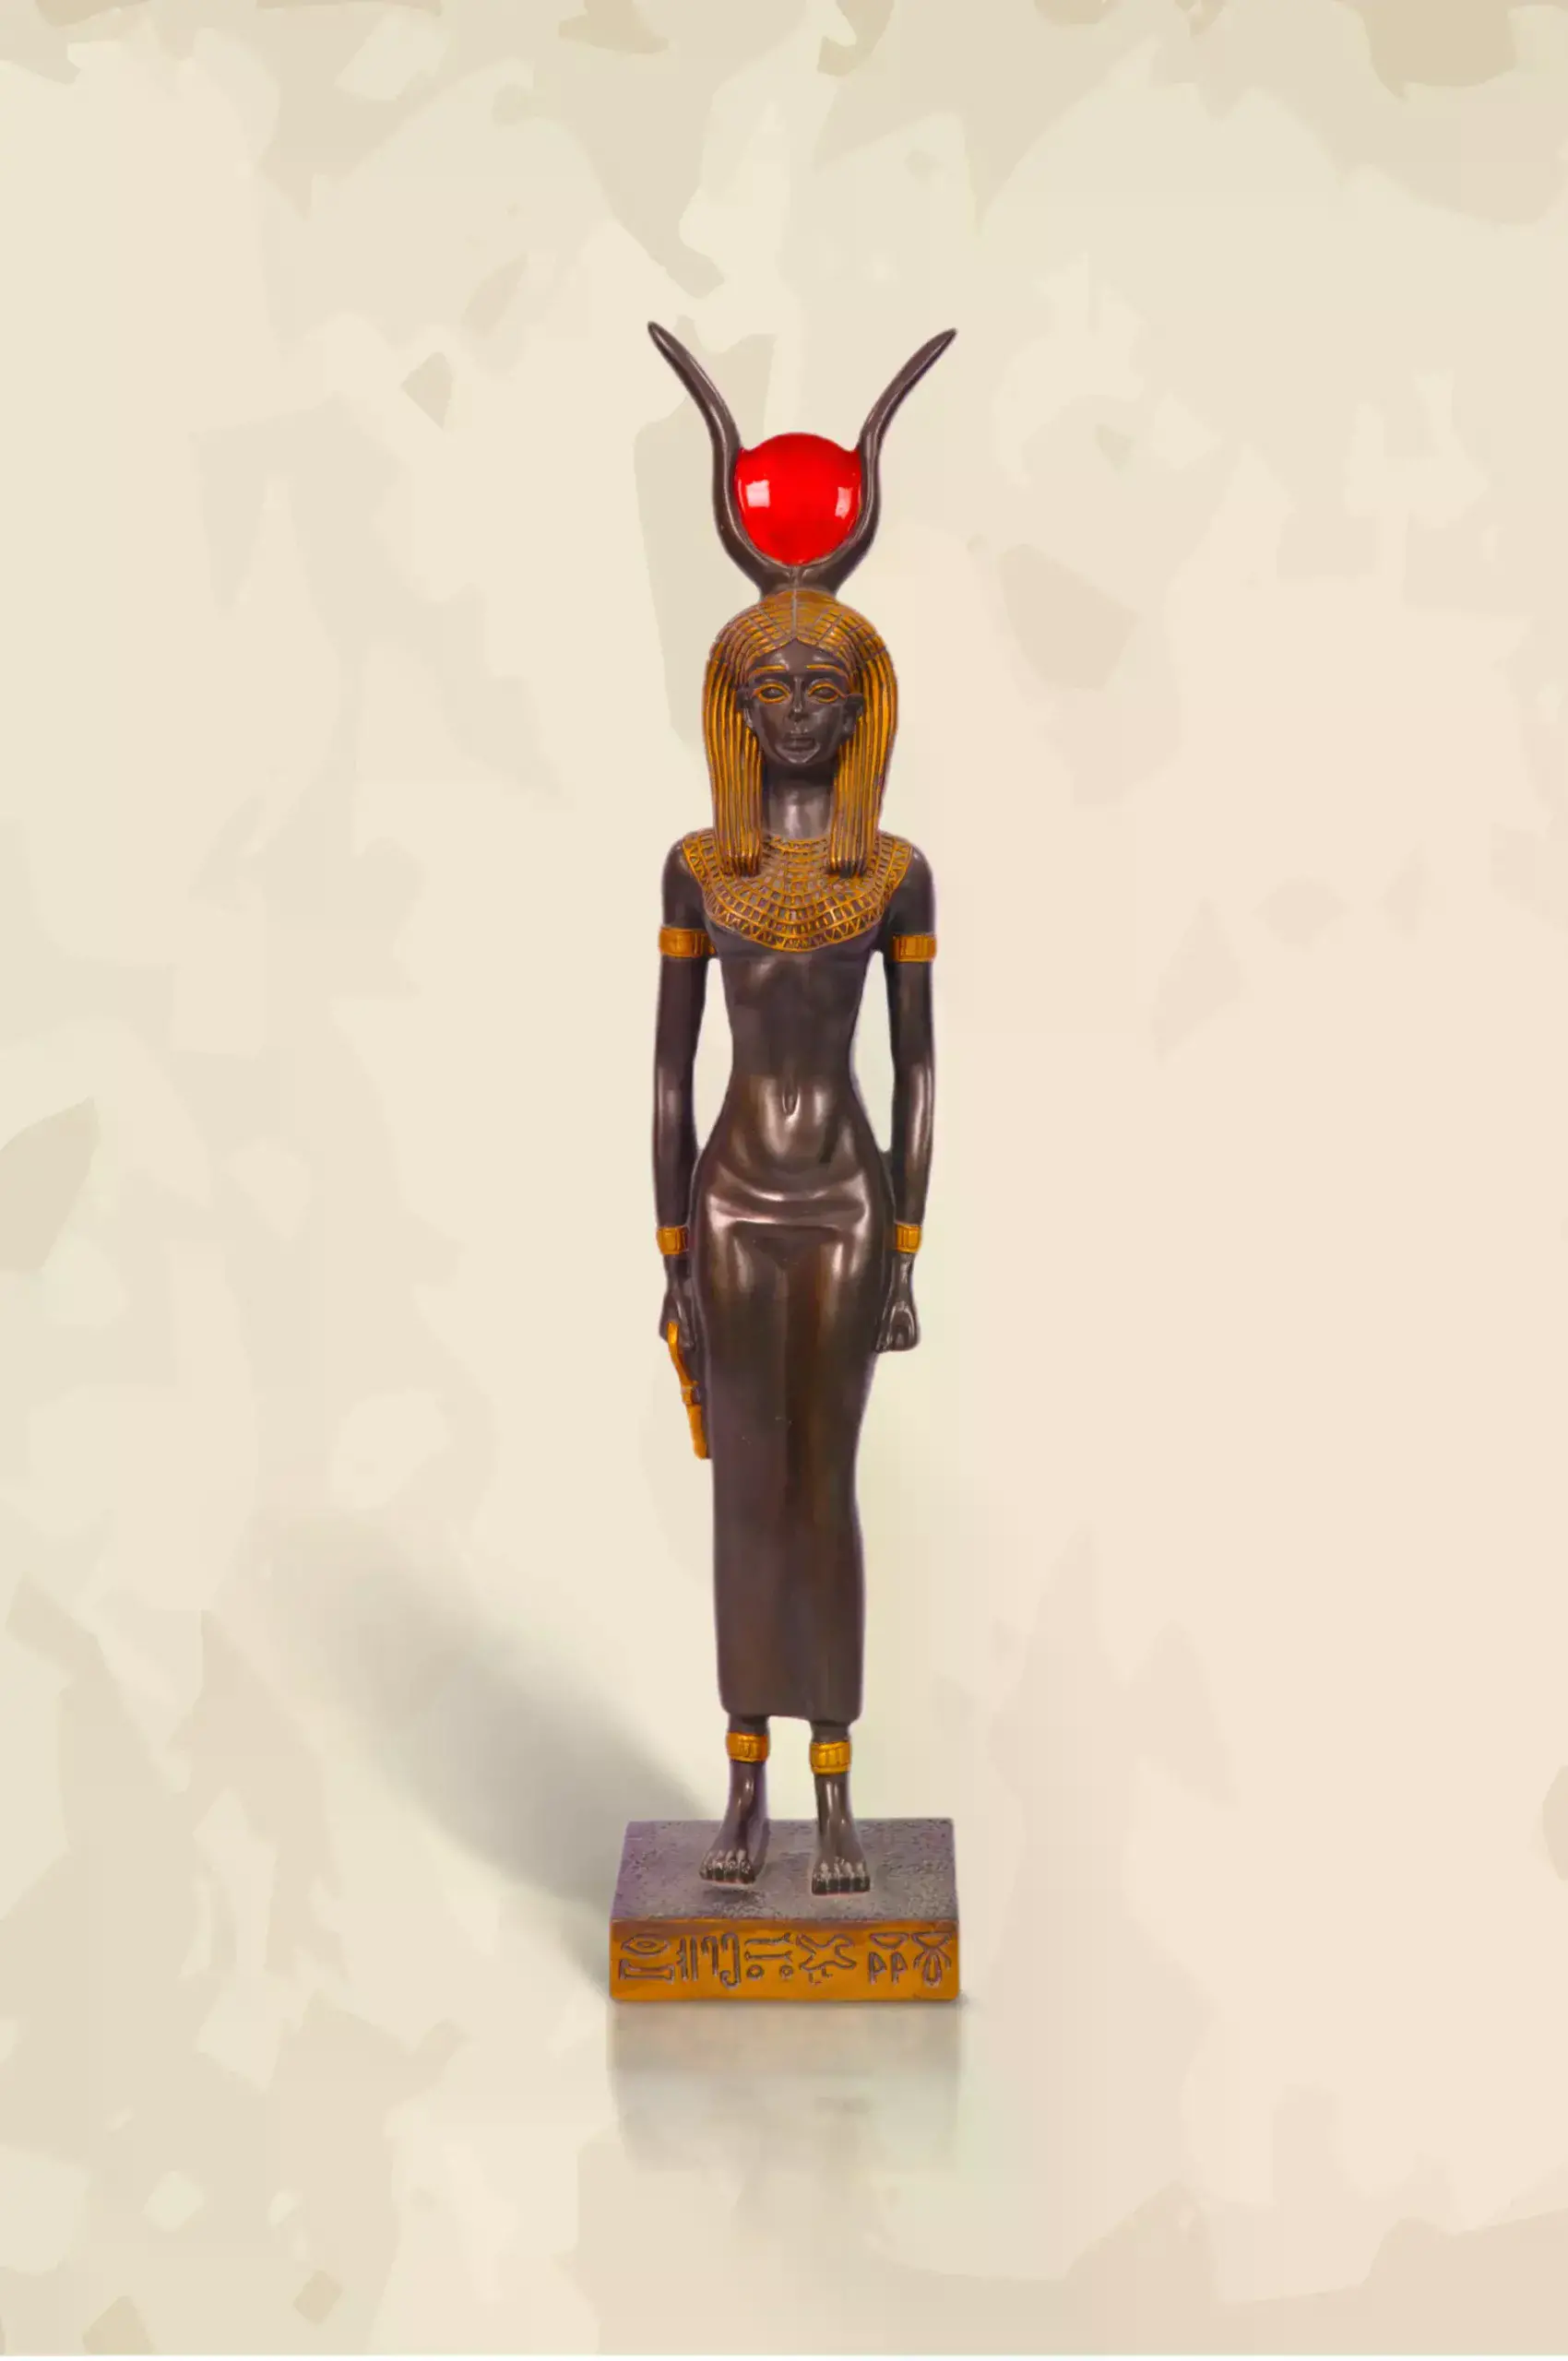 Black and golden statue of ancient egyptian queen Isis godess of magic and wisdom